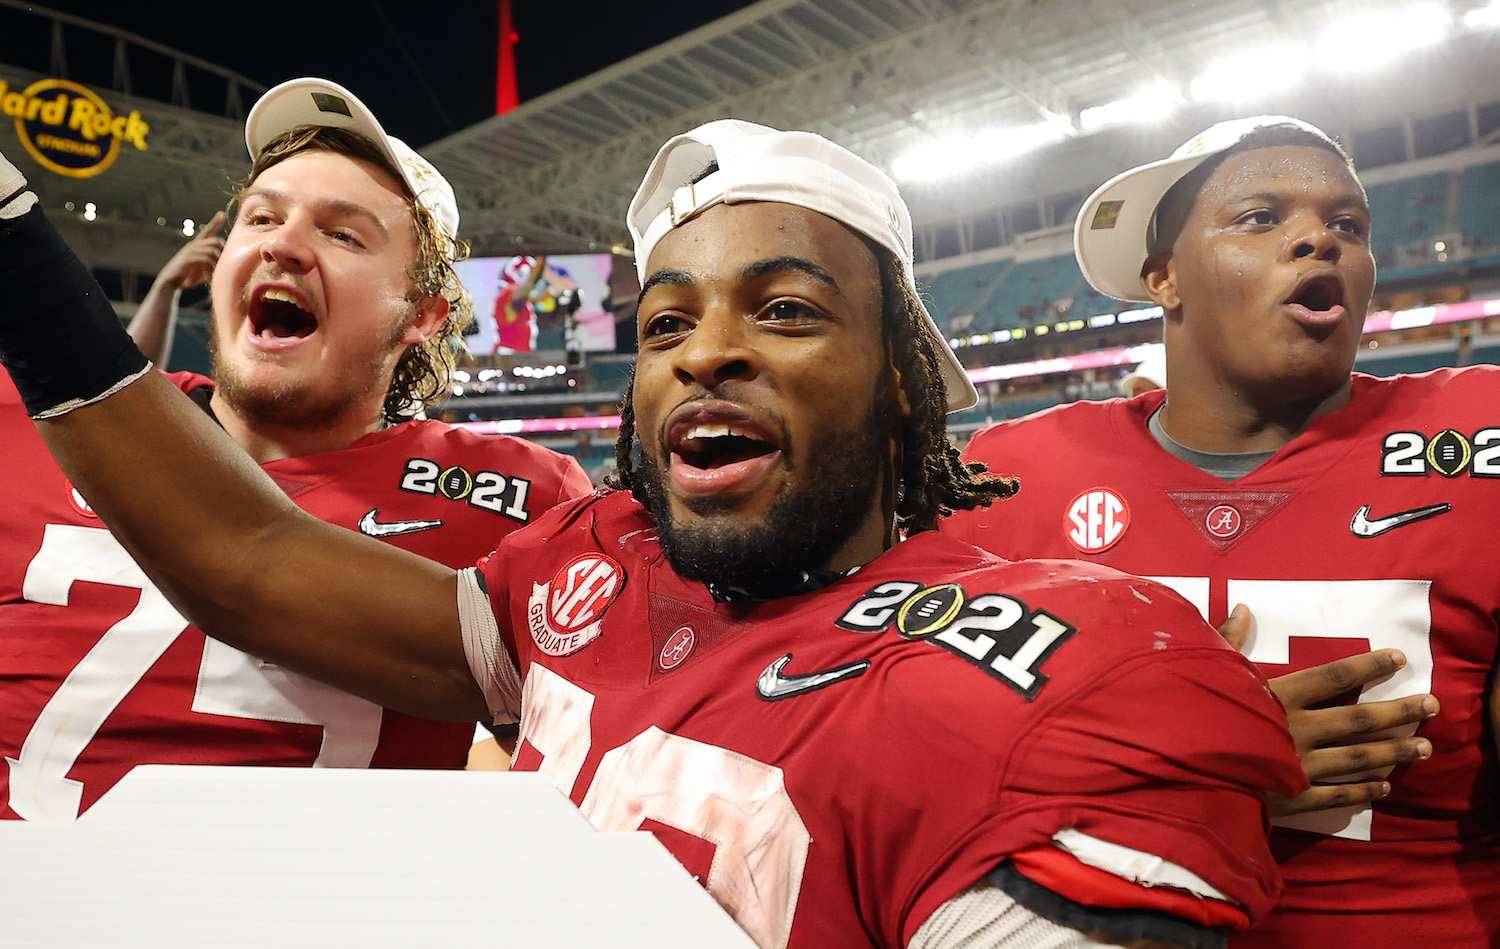 MIAMI GARDENS, FLORIDA - JANUARY 11: Najee Harris #22 of the Alabama Crimson Tide celebrates following the College Football Playoff National Championship game win over the Ohio State Buckeyes at Hard Rock Stadium on January 11, 2021 in Miami Gardens, Florida. (Photo by Kevin C. Cox/Getty Images)